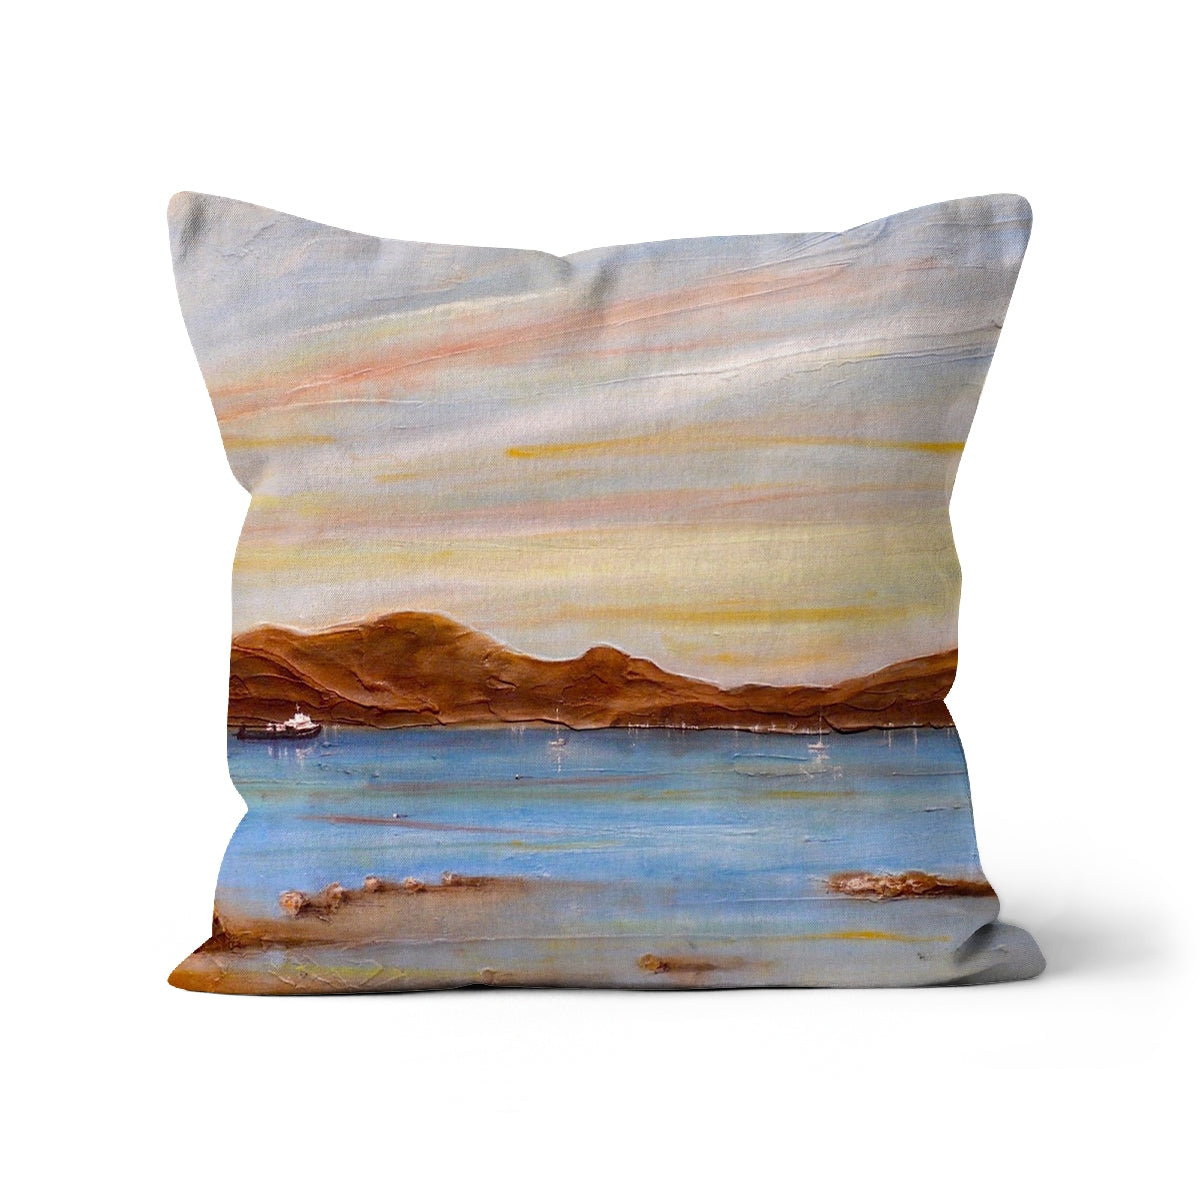 The Last Ferry To Dunoon Art Gifts Cushion-Cushions-River Clyde Art Gallery-Faux Suede-16"x16"-Paintings, Prints, Homeware, Art Gifts From Scotland By Scottish Artist Kevin Hunter